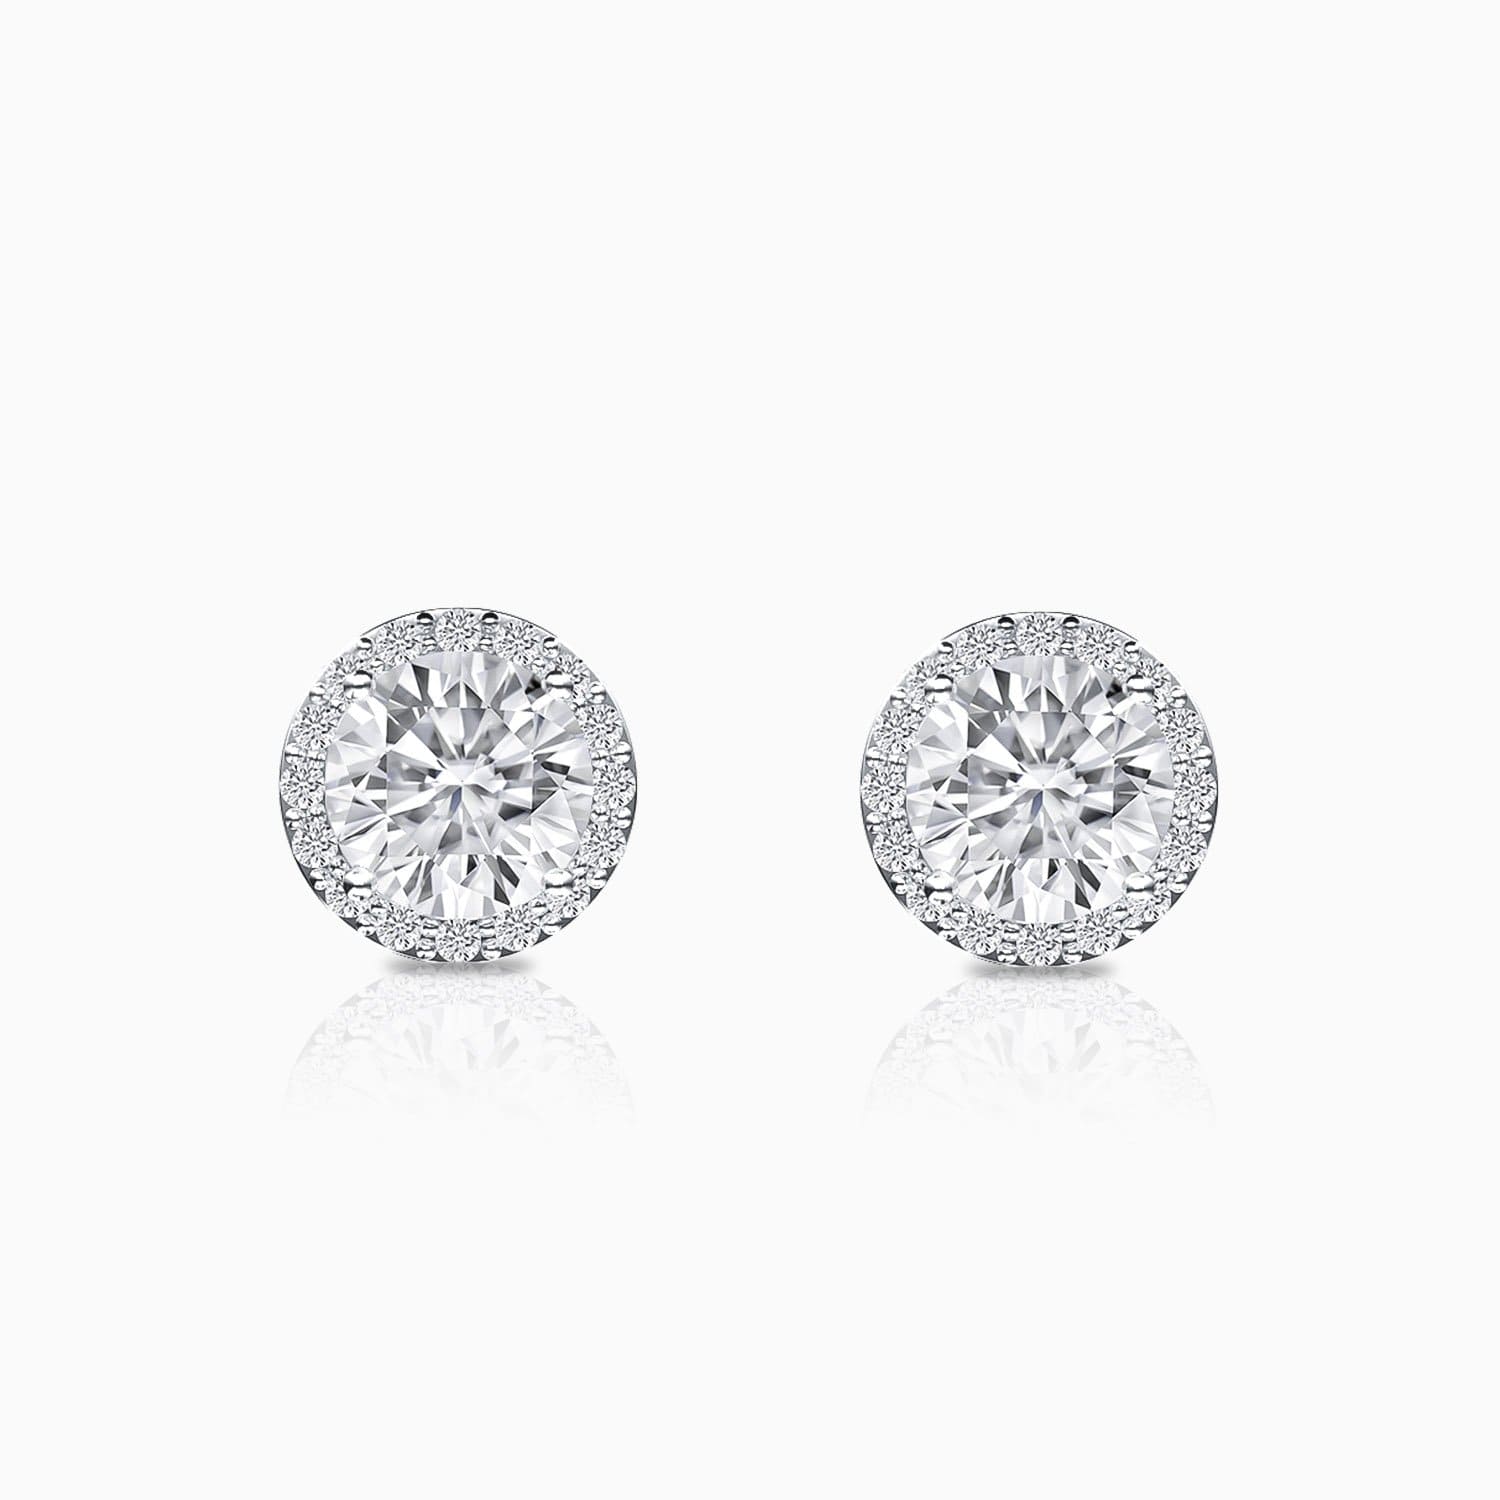 Moissanite Stud Earrings Four Prong Setting Halo Round Solitaire Stone